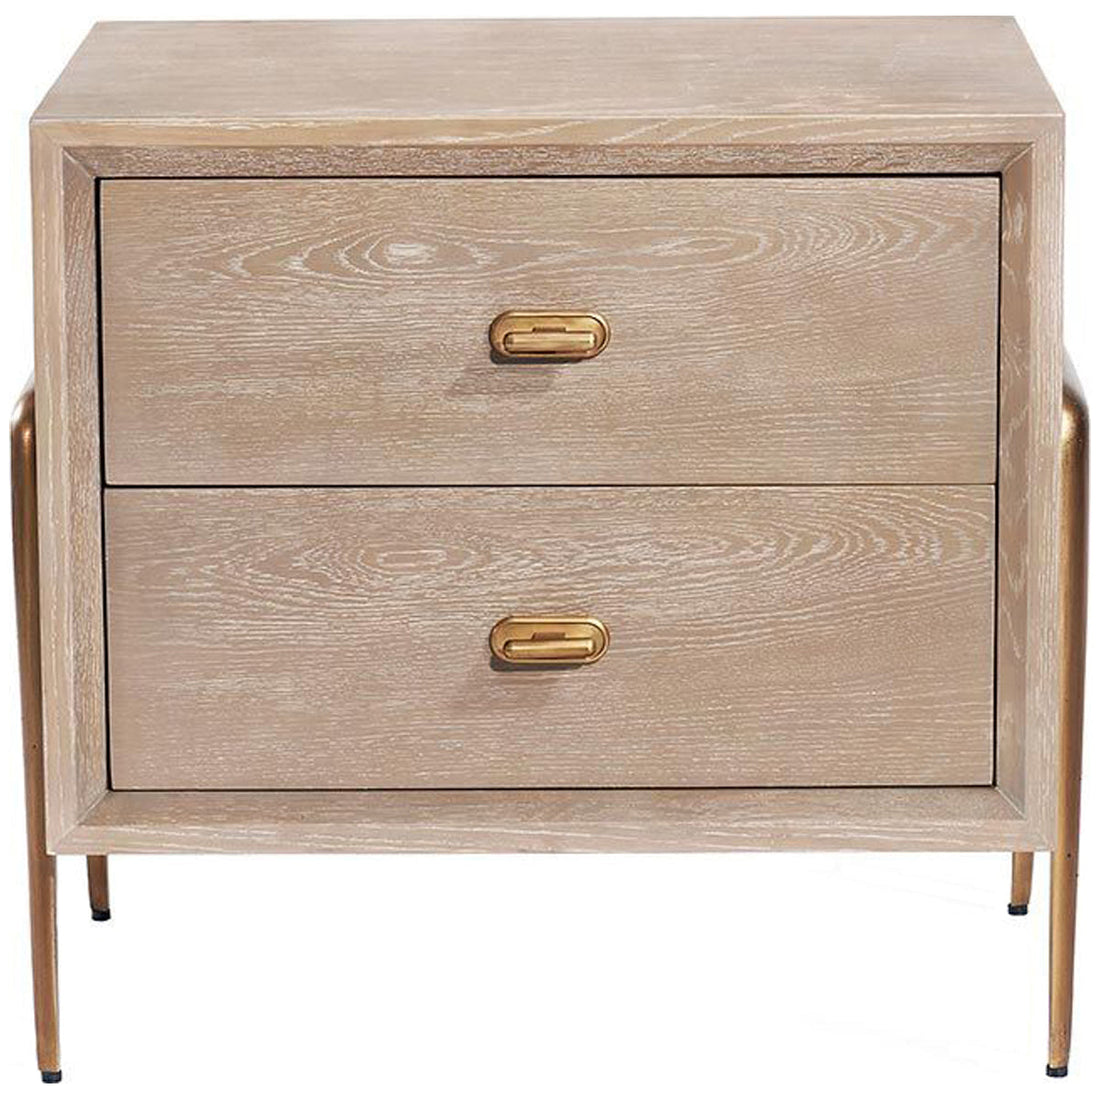 Interlude Home Creed Bedside Chest